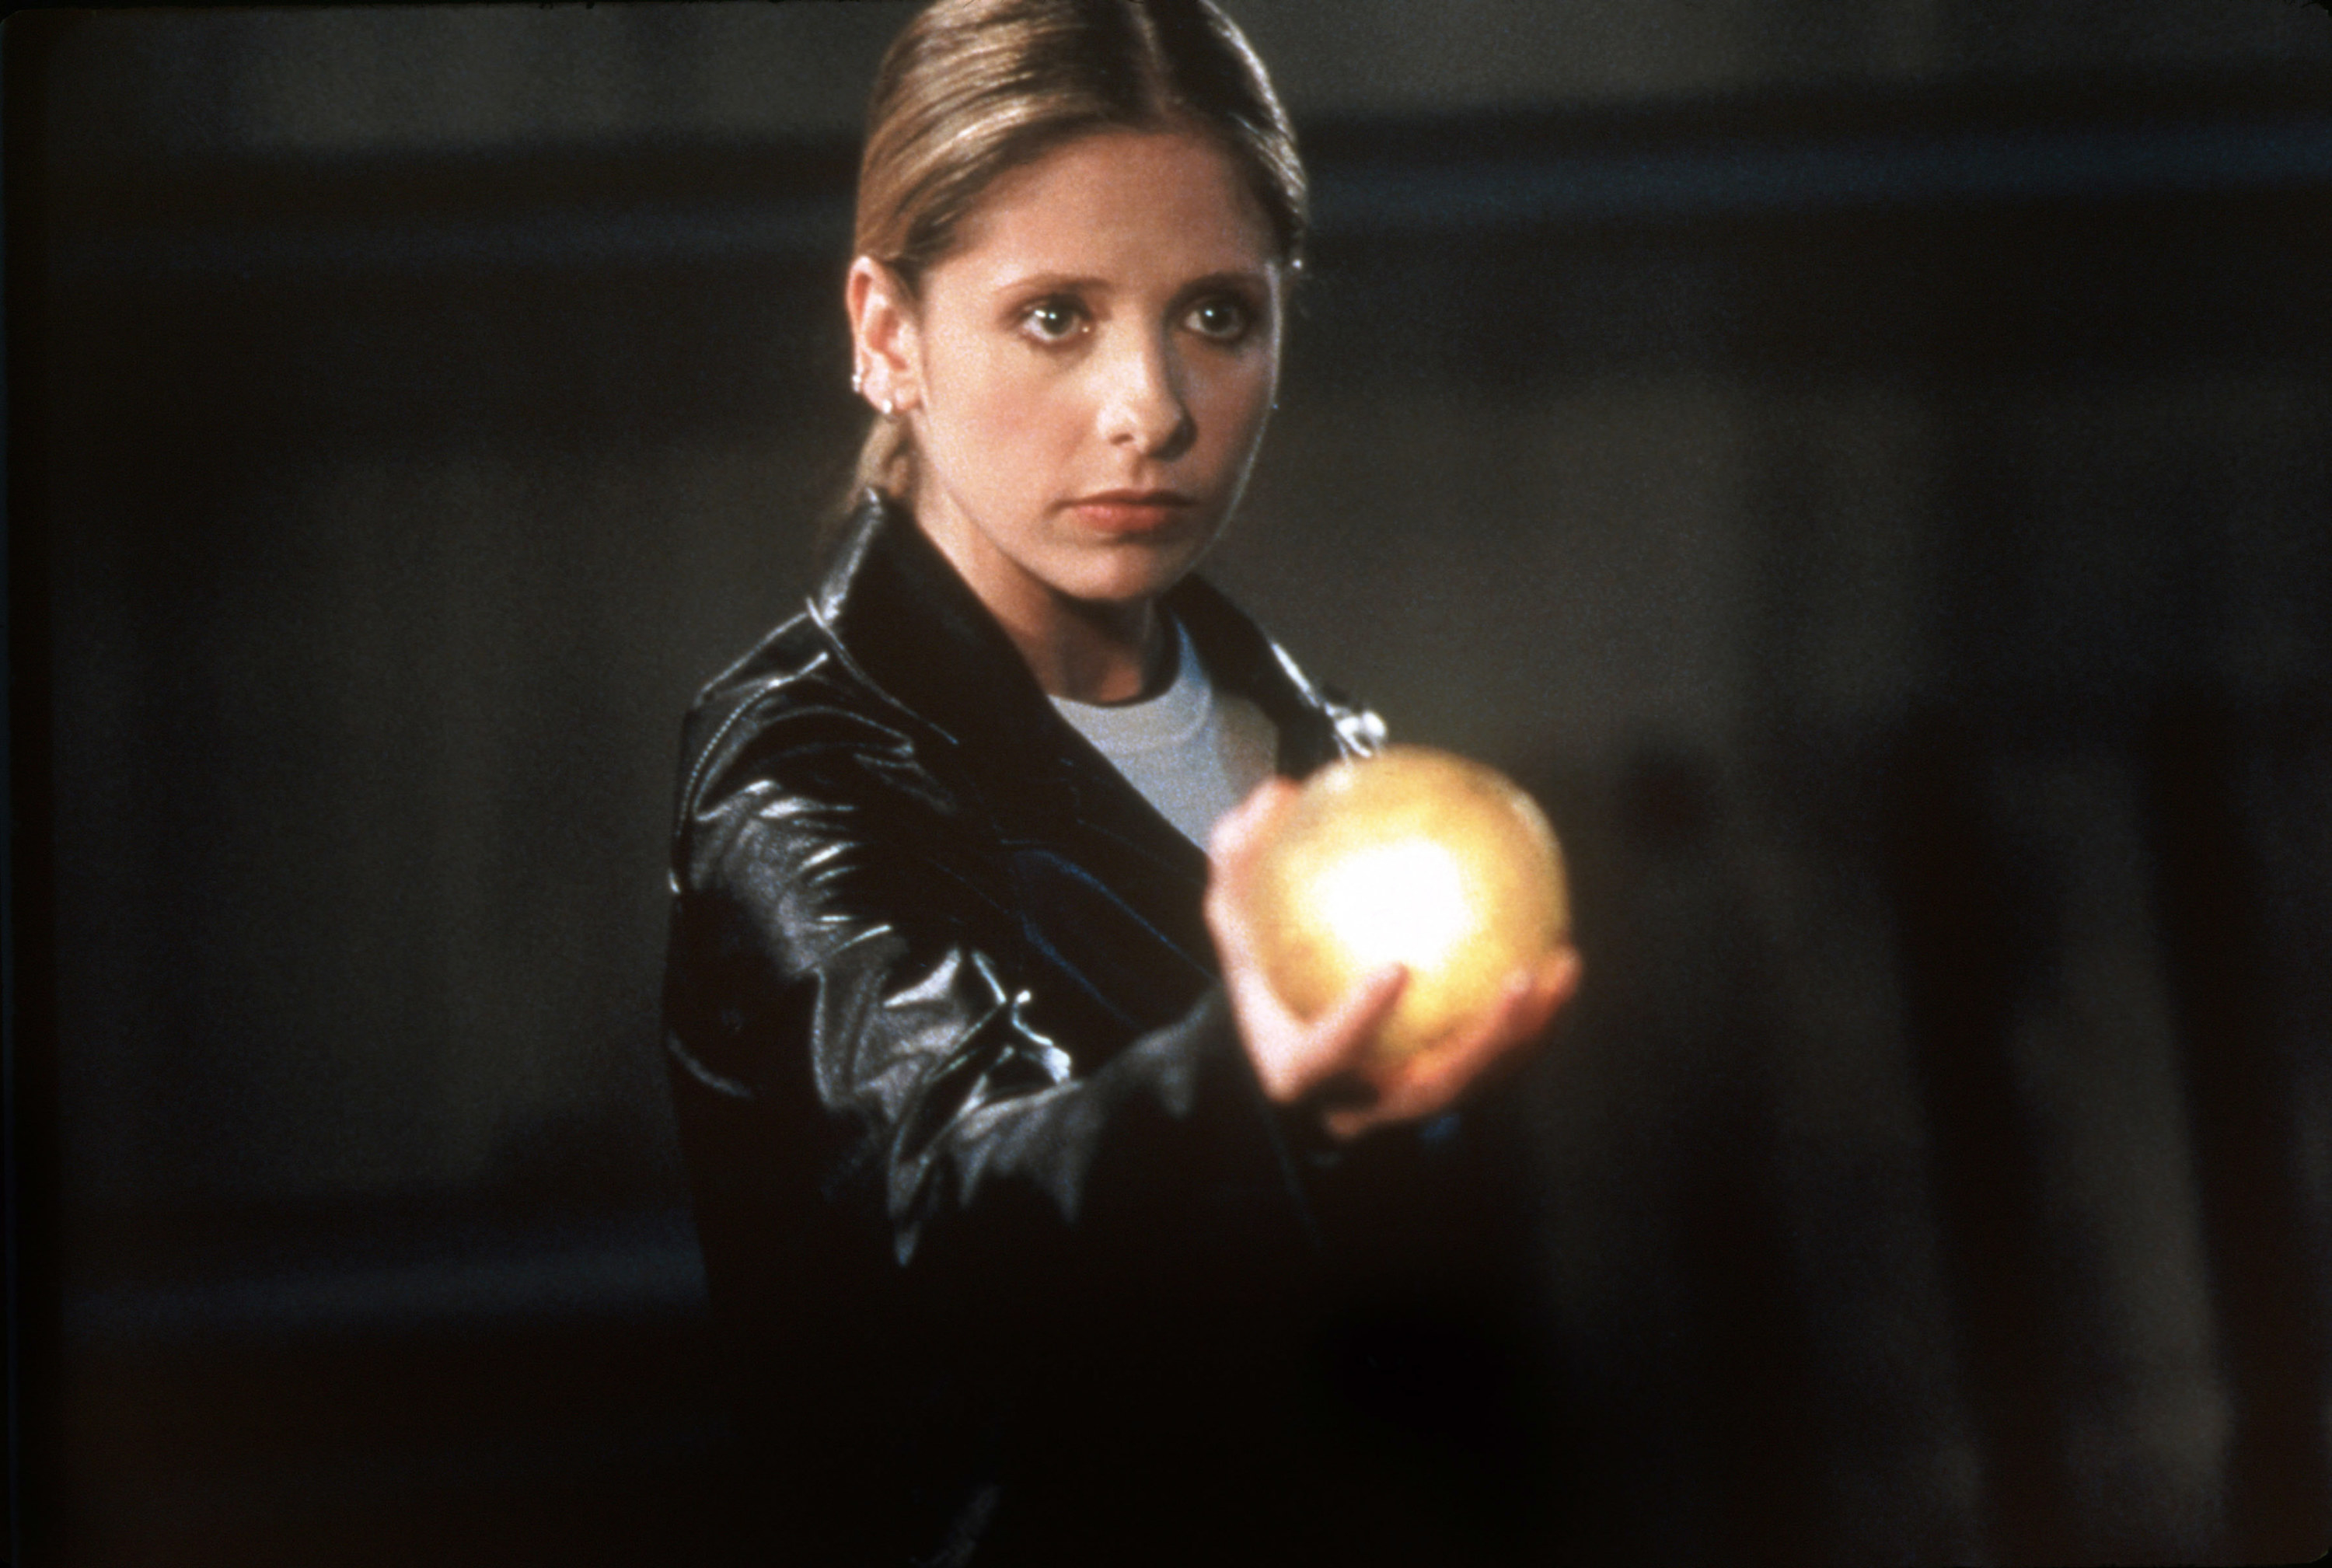 Buffy holding a glowing orb